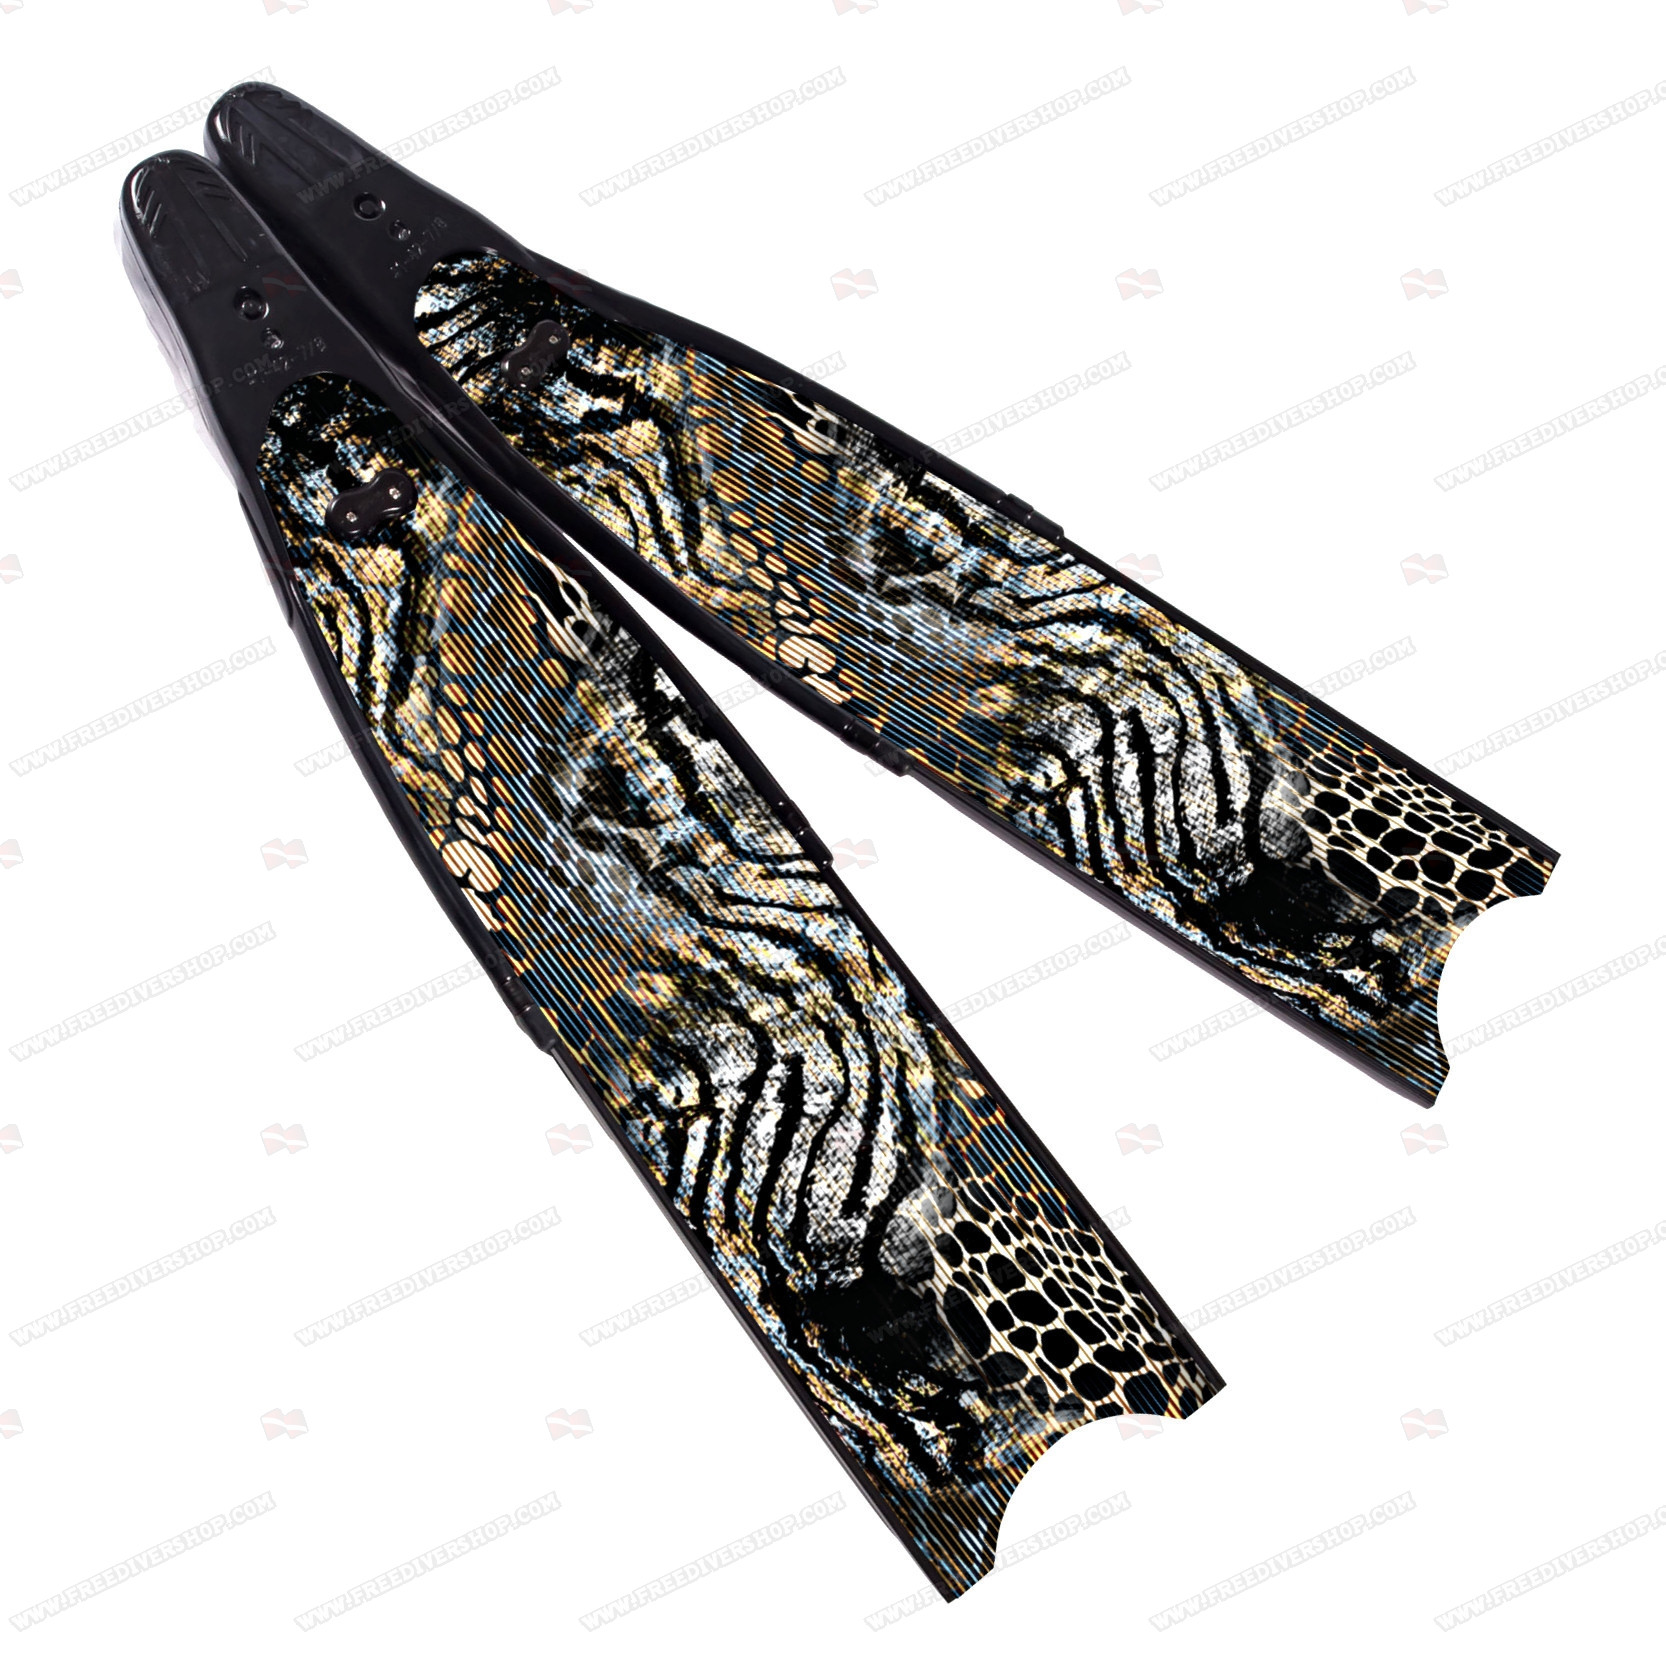 Leaderfins Carbon NEO Freediving Spearfishing Fins ALL SIZES 